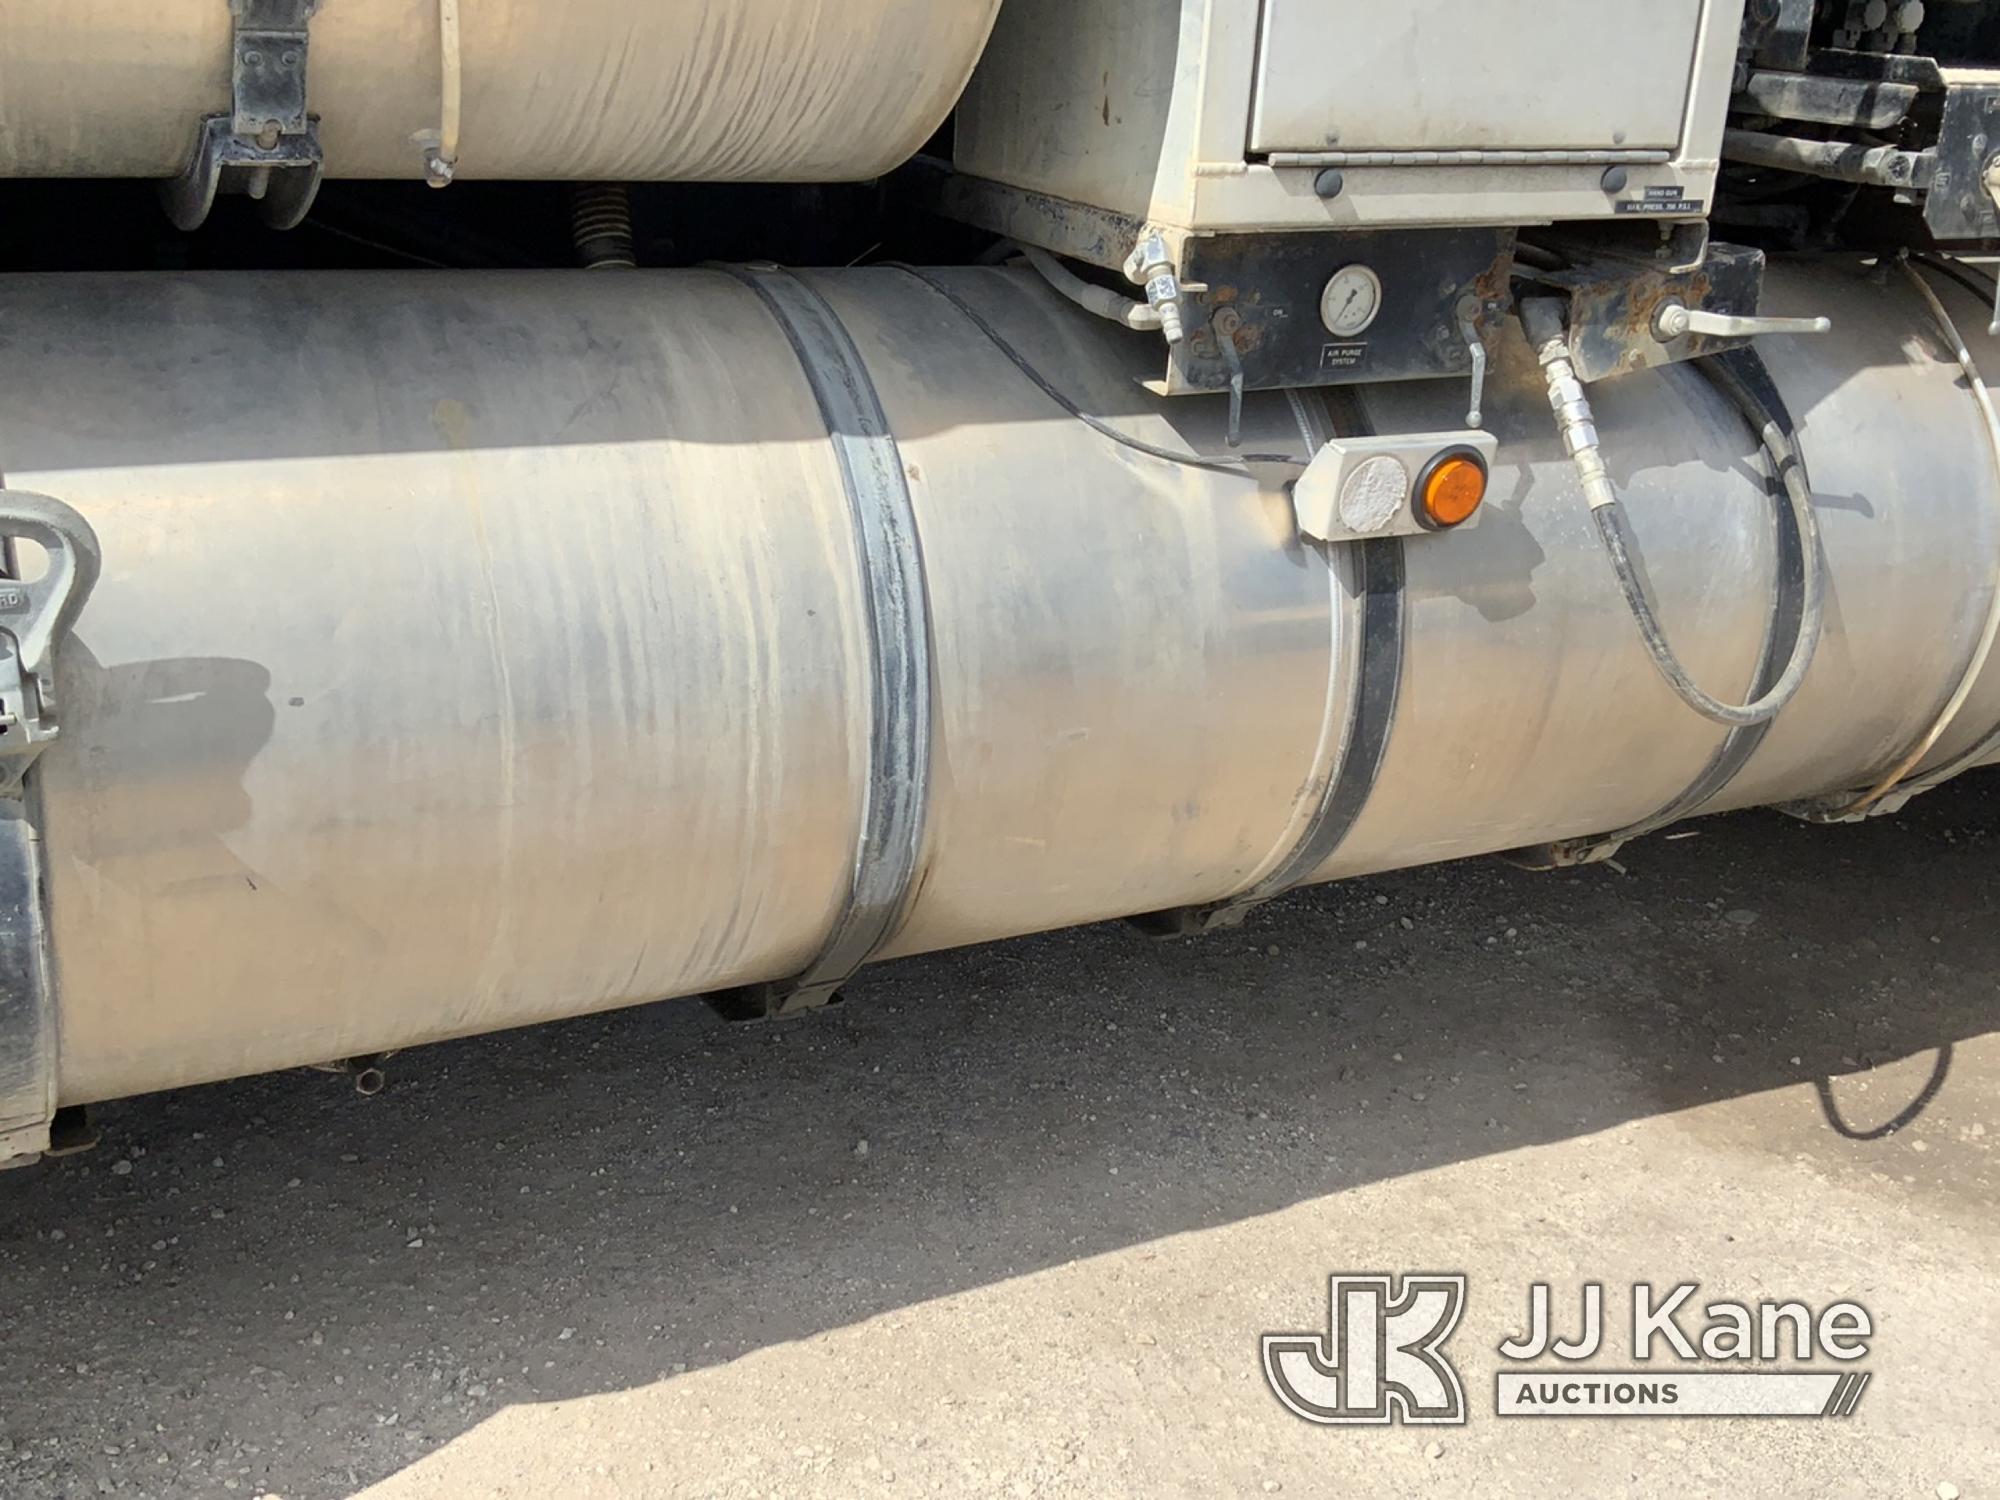 (Hampshire, IL) Vactor 2113-824-18, Vactor/Sewer & Jet Rodder System mounted on 2005 Sterling Acterr